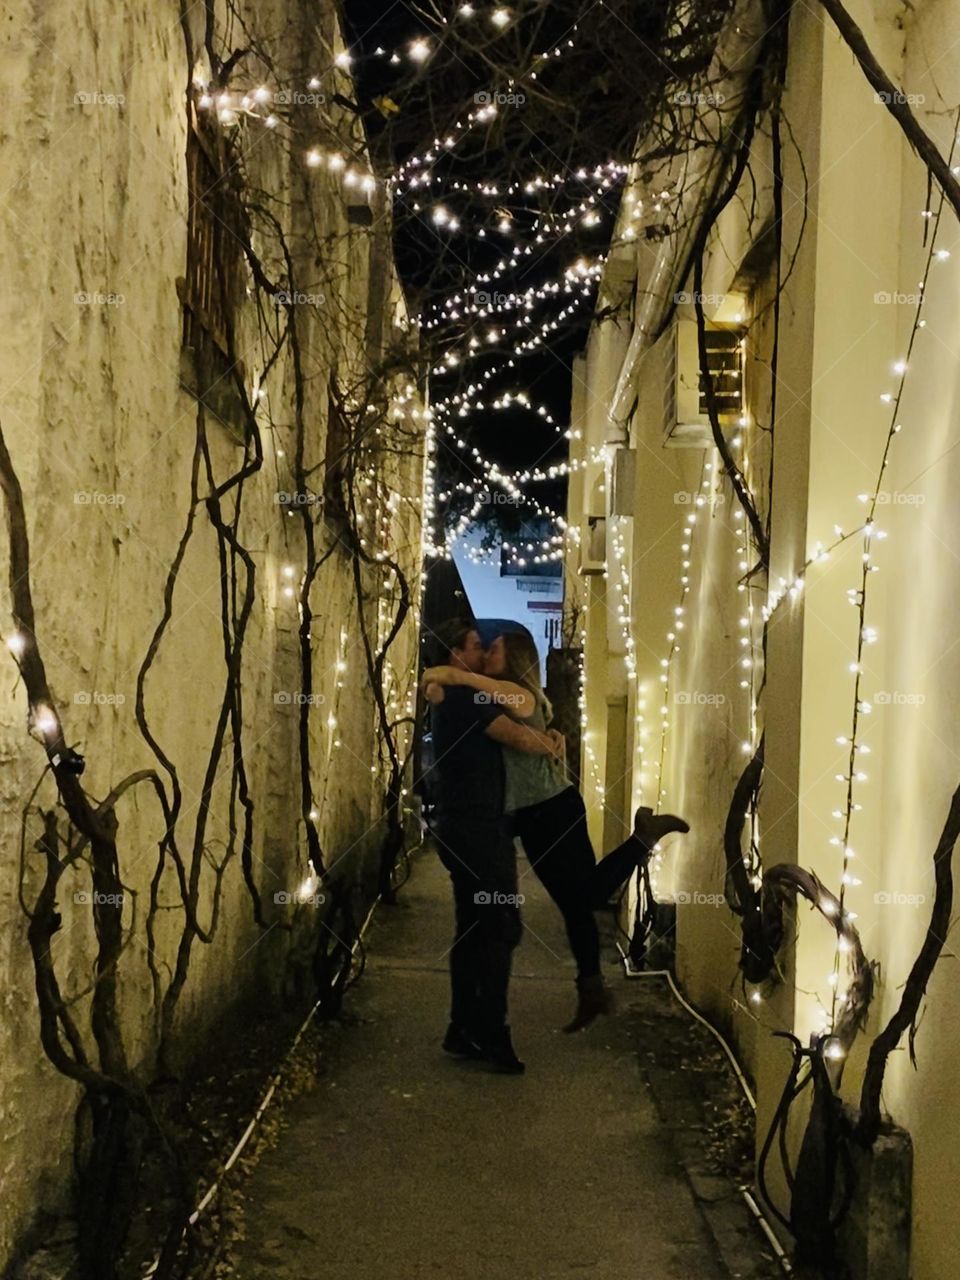 So In Love! Kissing in a romantic alley under the lights and stars 